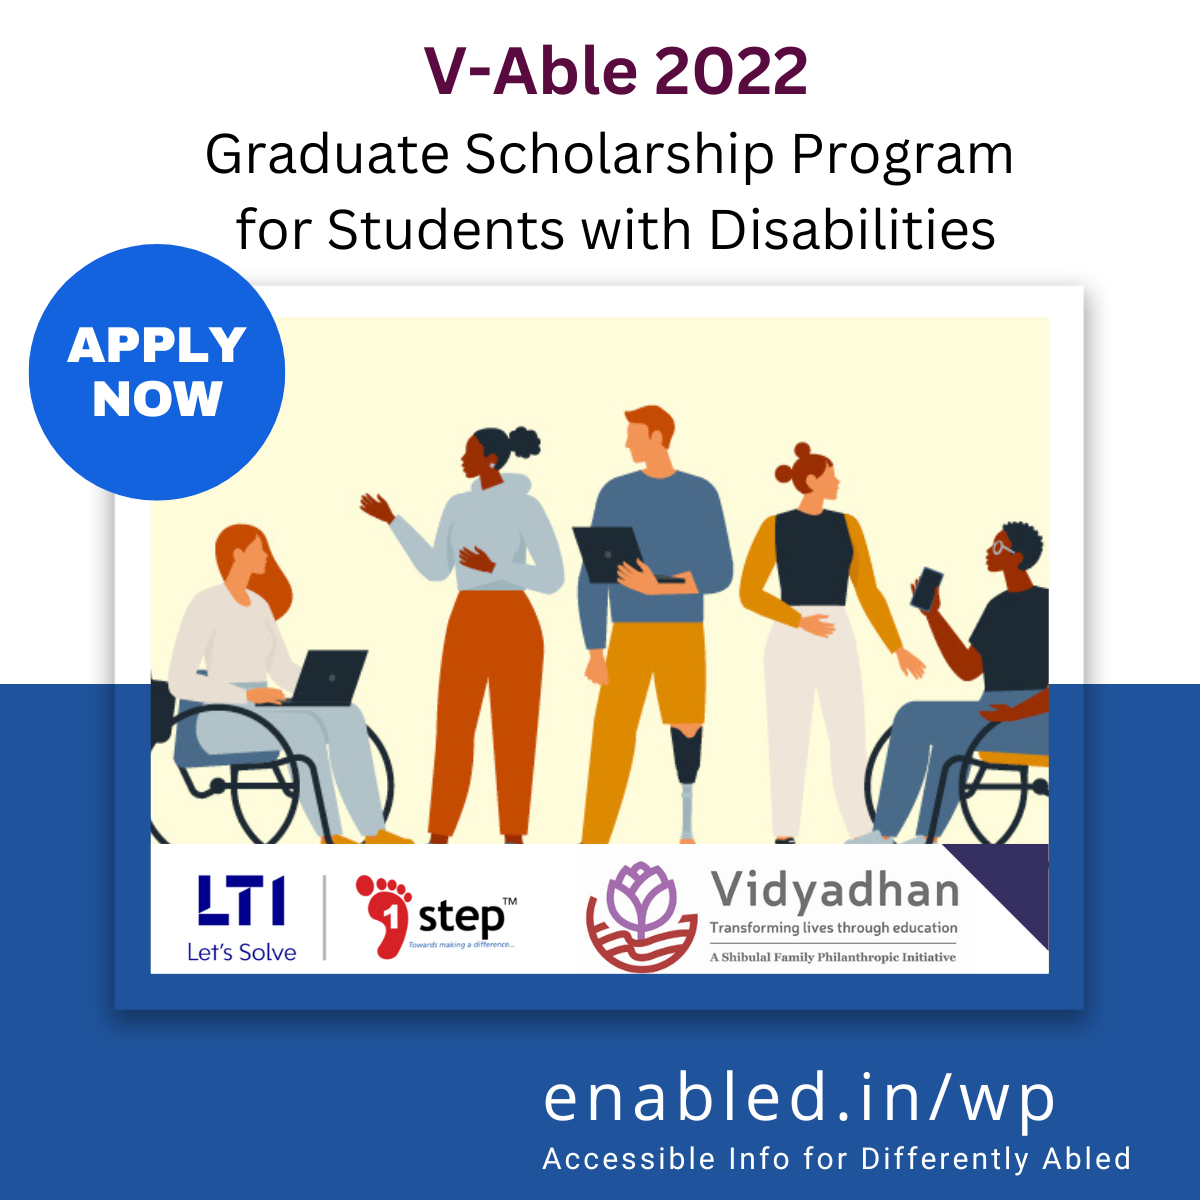 VAble 2022 Graduate Scholarship Program for Students with